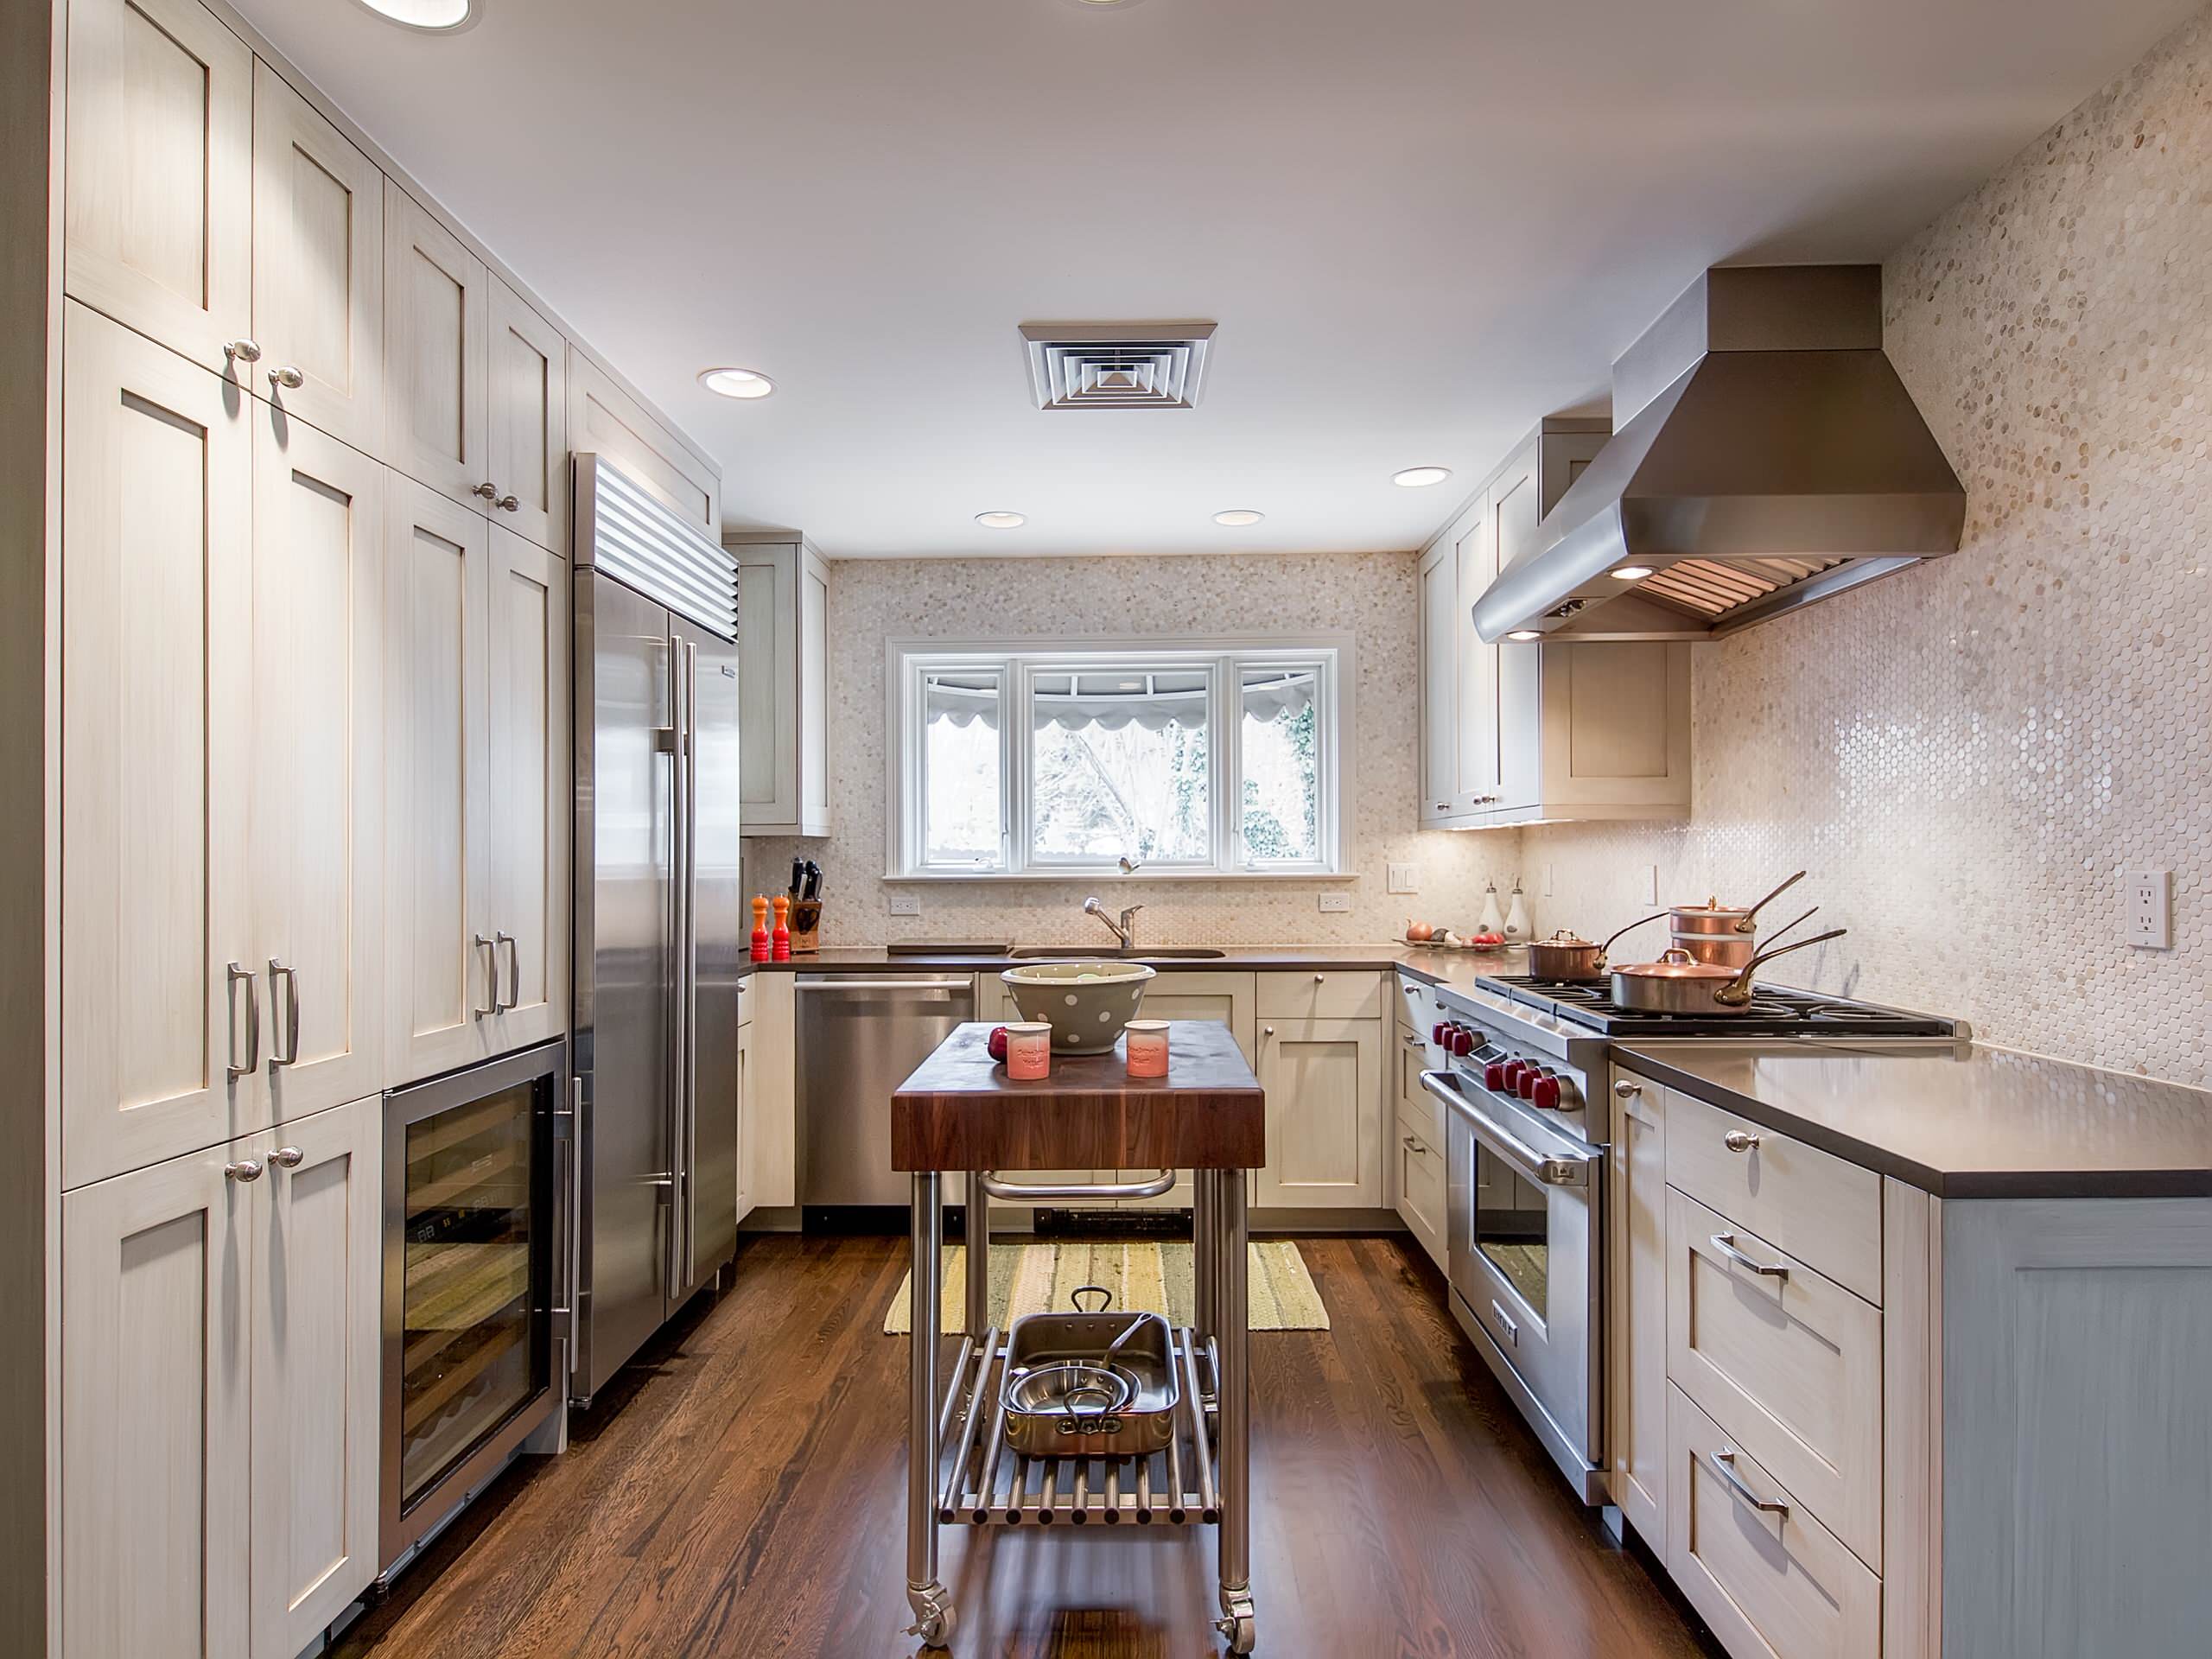 Outstanding small kitchen remodel with island Small Kitchen Island Ideas Houzz